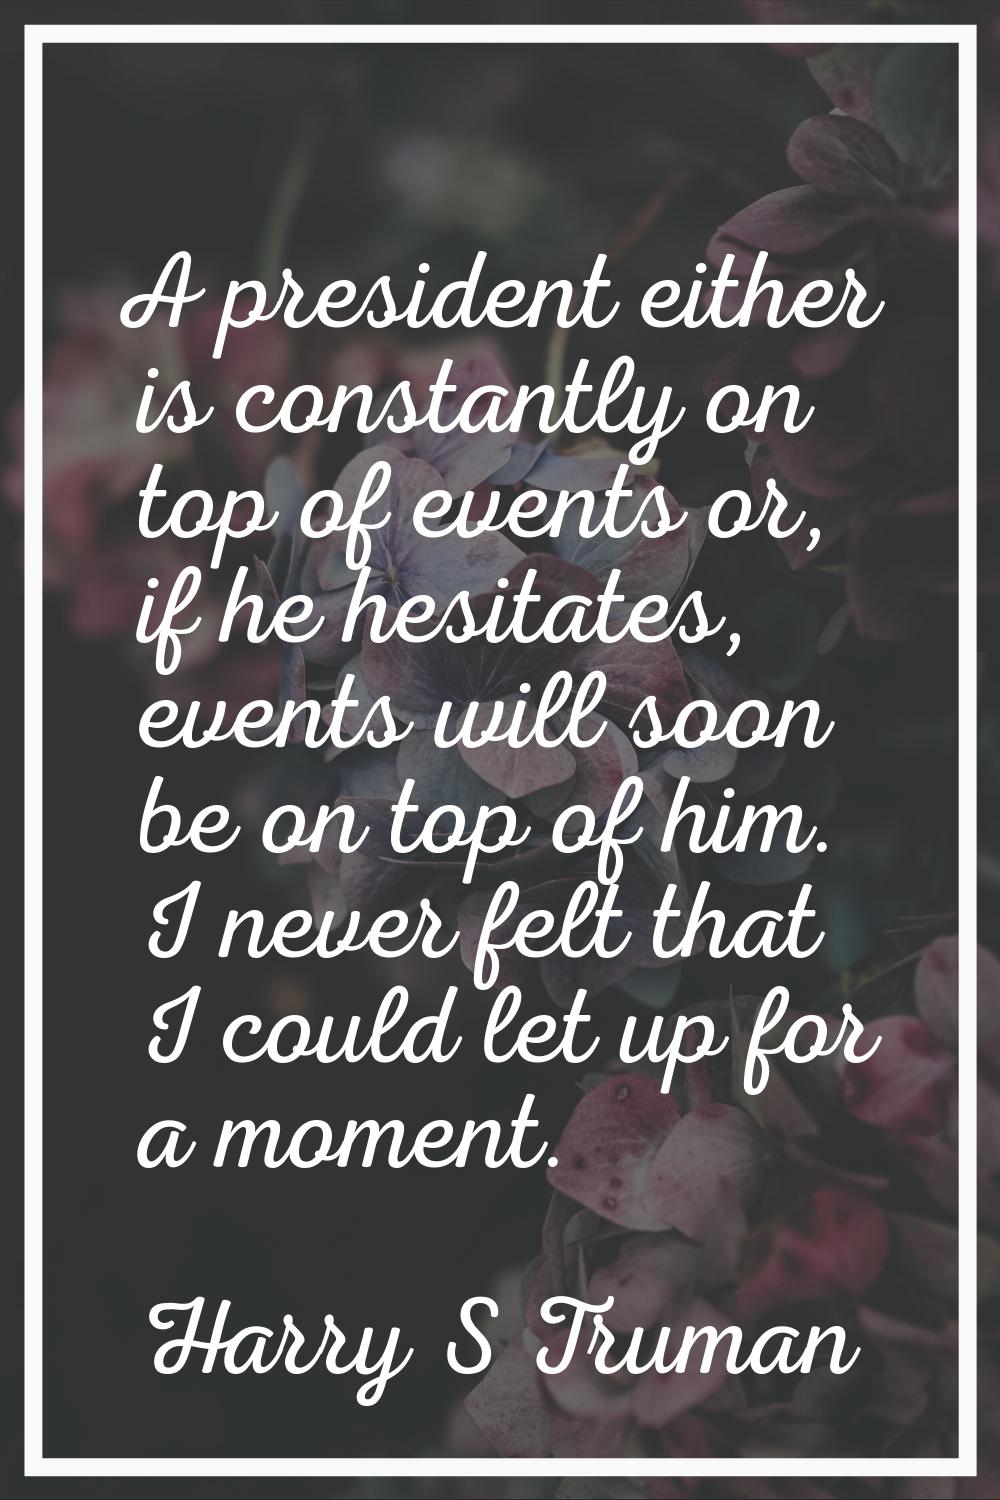 A president either is constantly on top of events or, if he hesitates, events will soon be on top o